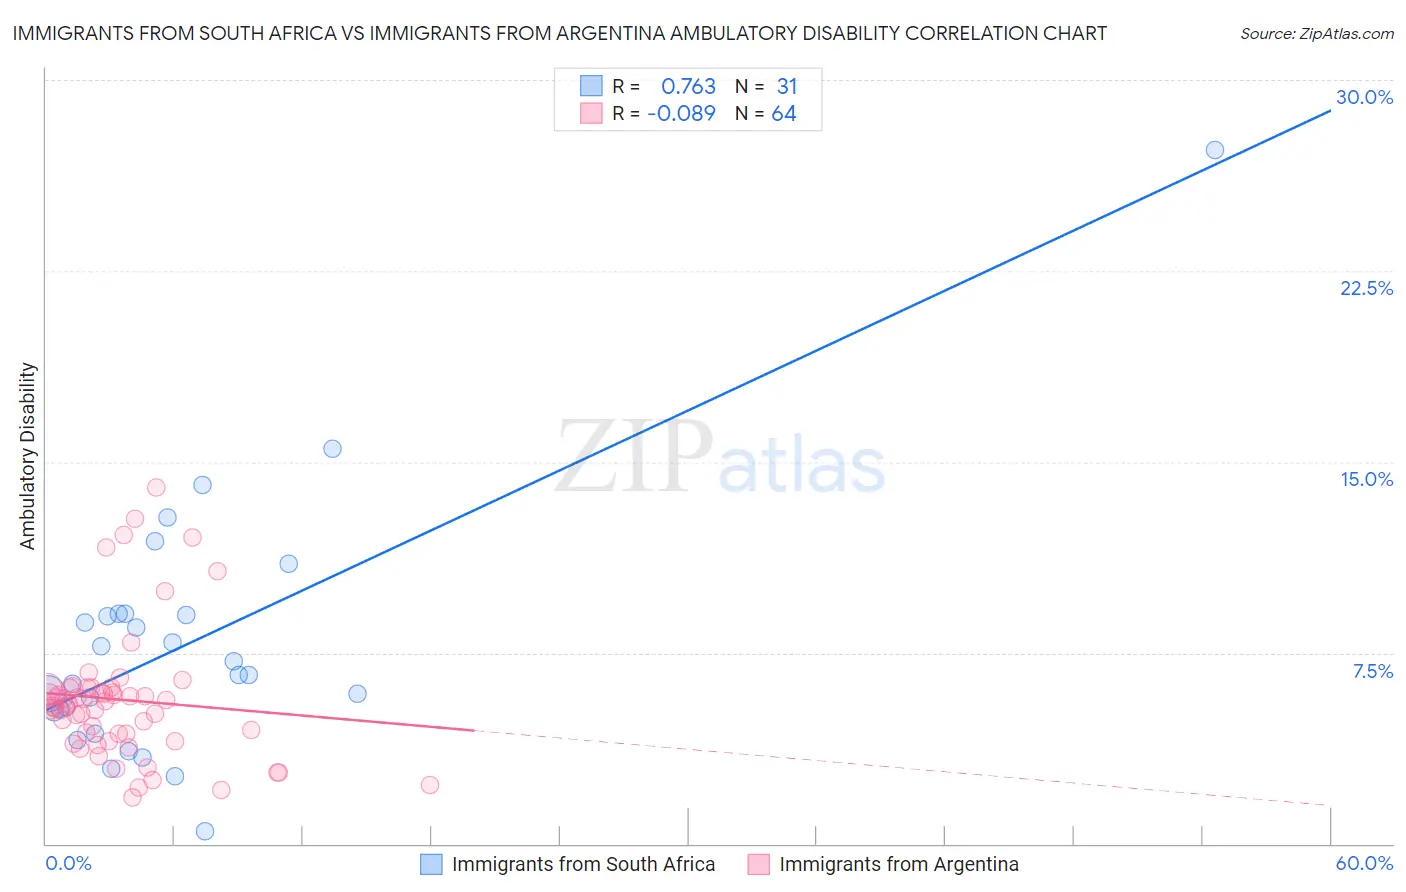 Immigrants from South Africa vs Immigrants from Argentina Ambulatory Disability